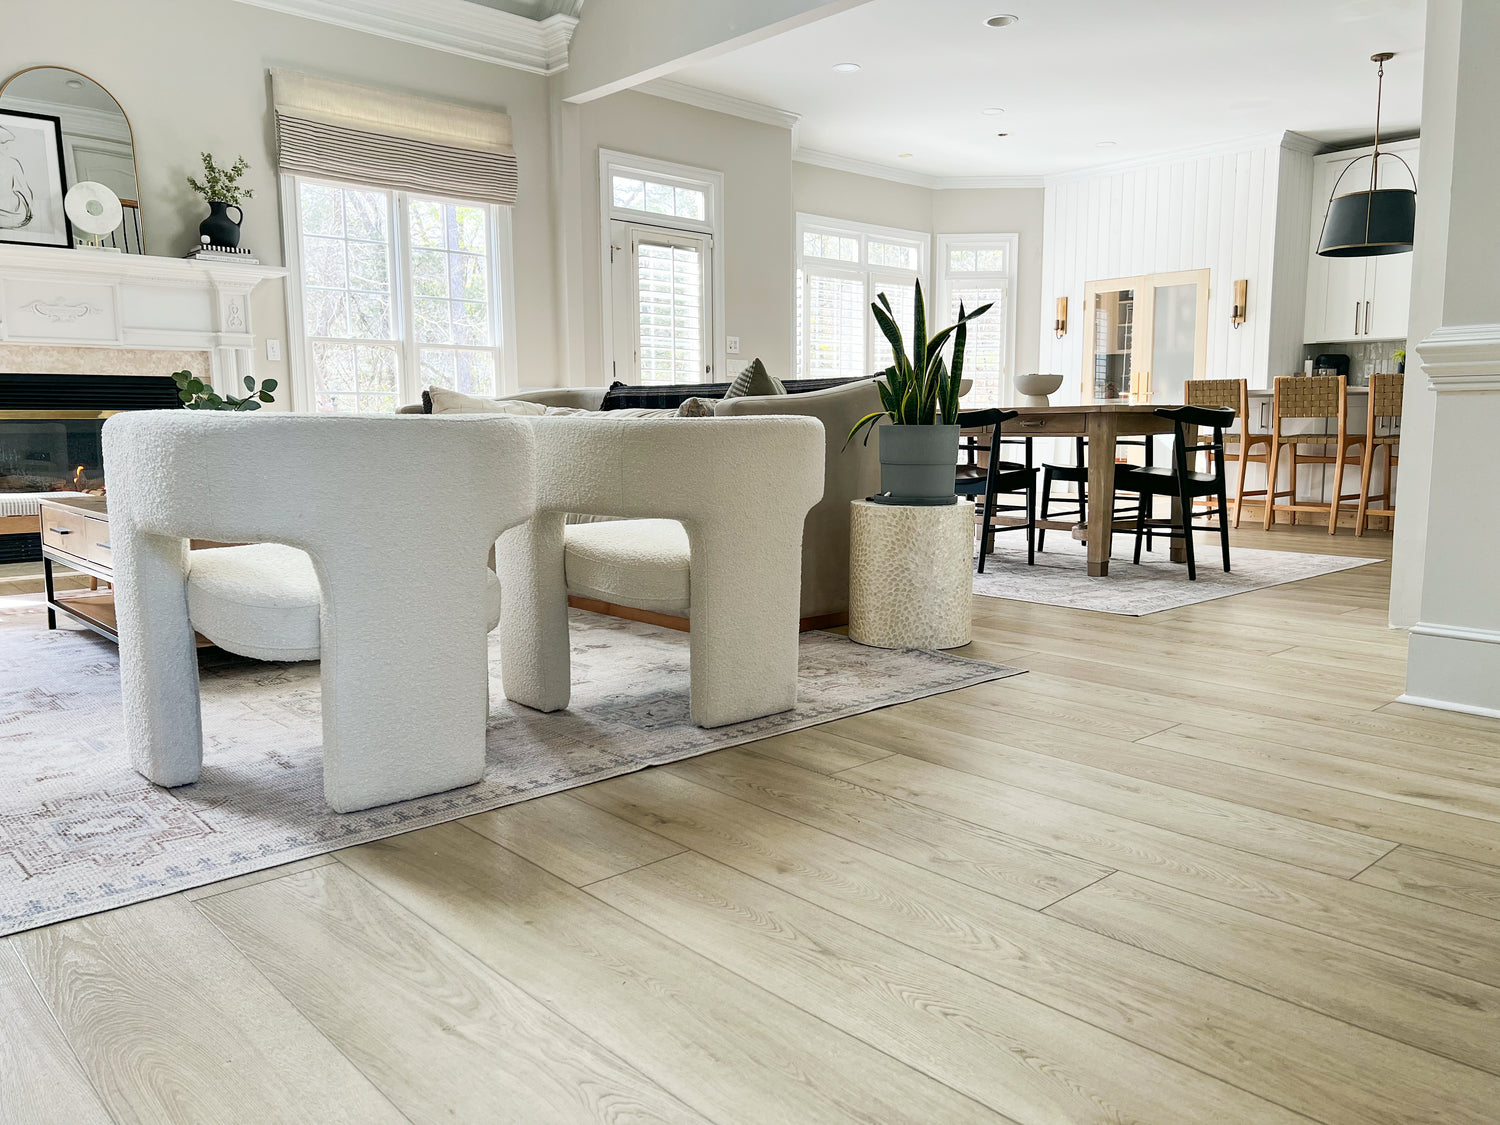 A photo of Hewn Stoneform Elite Luxury Plank Flooring installed in a living room.